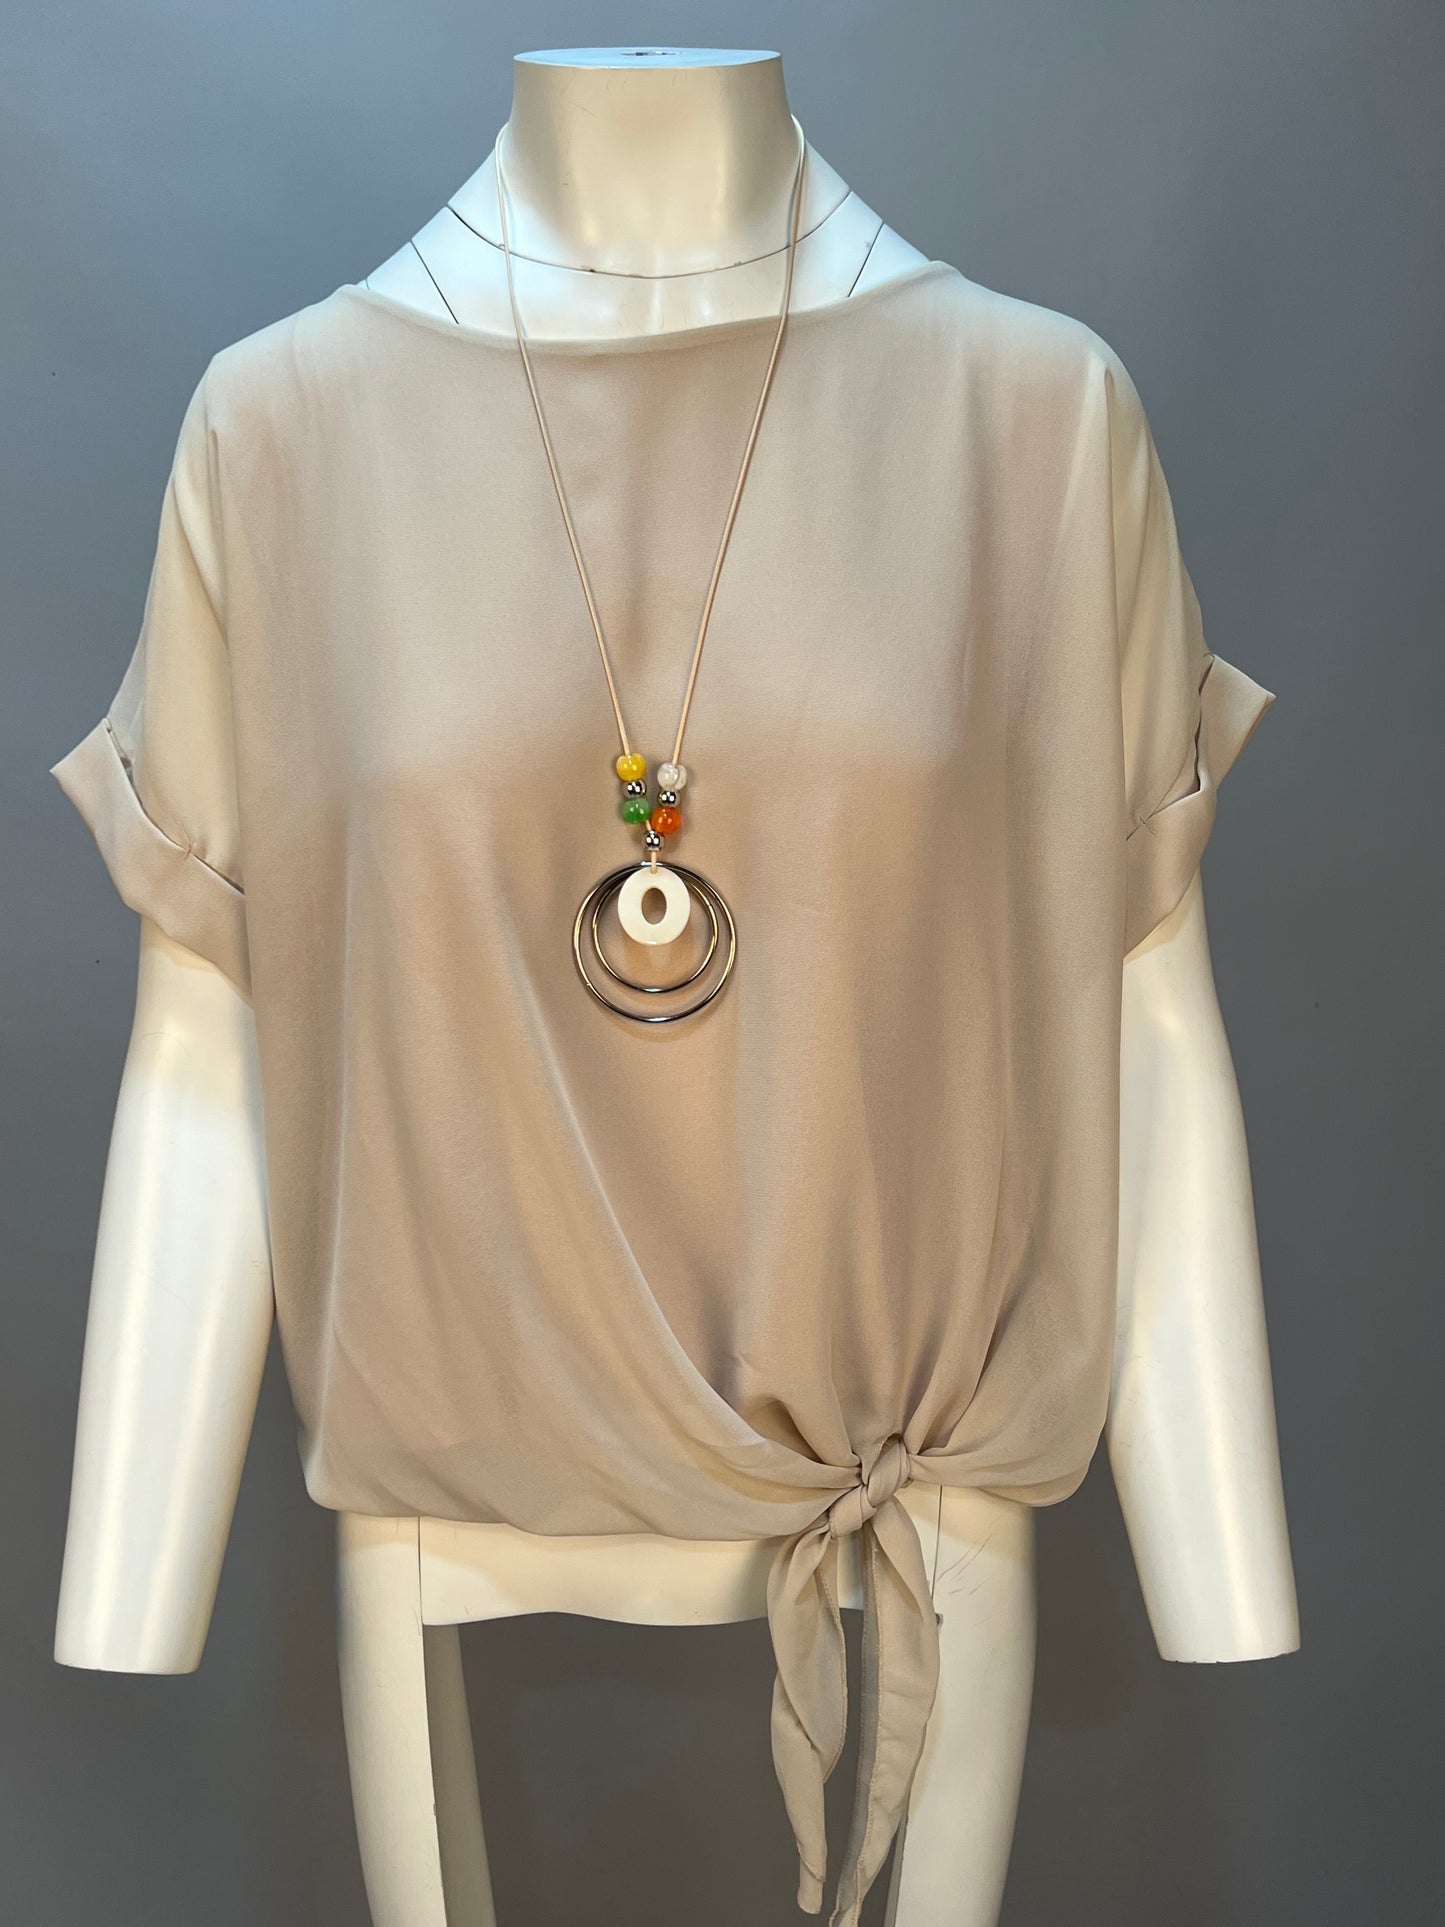 Lipstick - Knot Top with Necklace - 30563S4